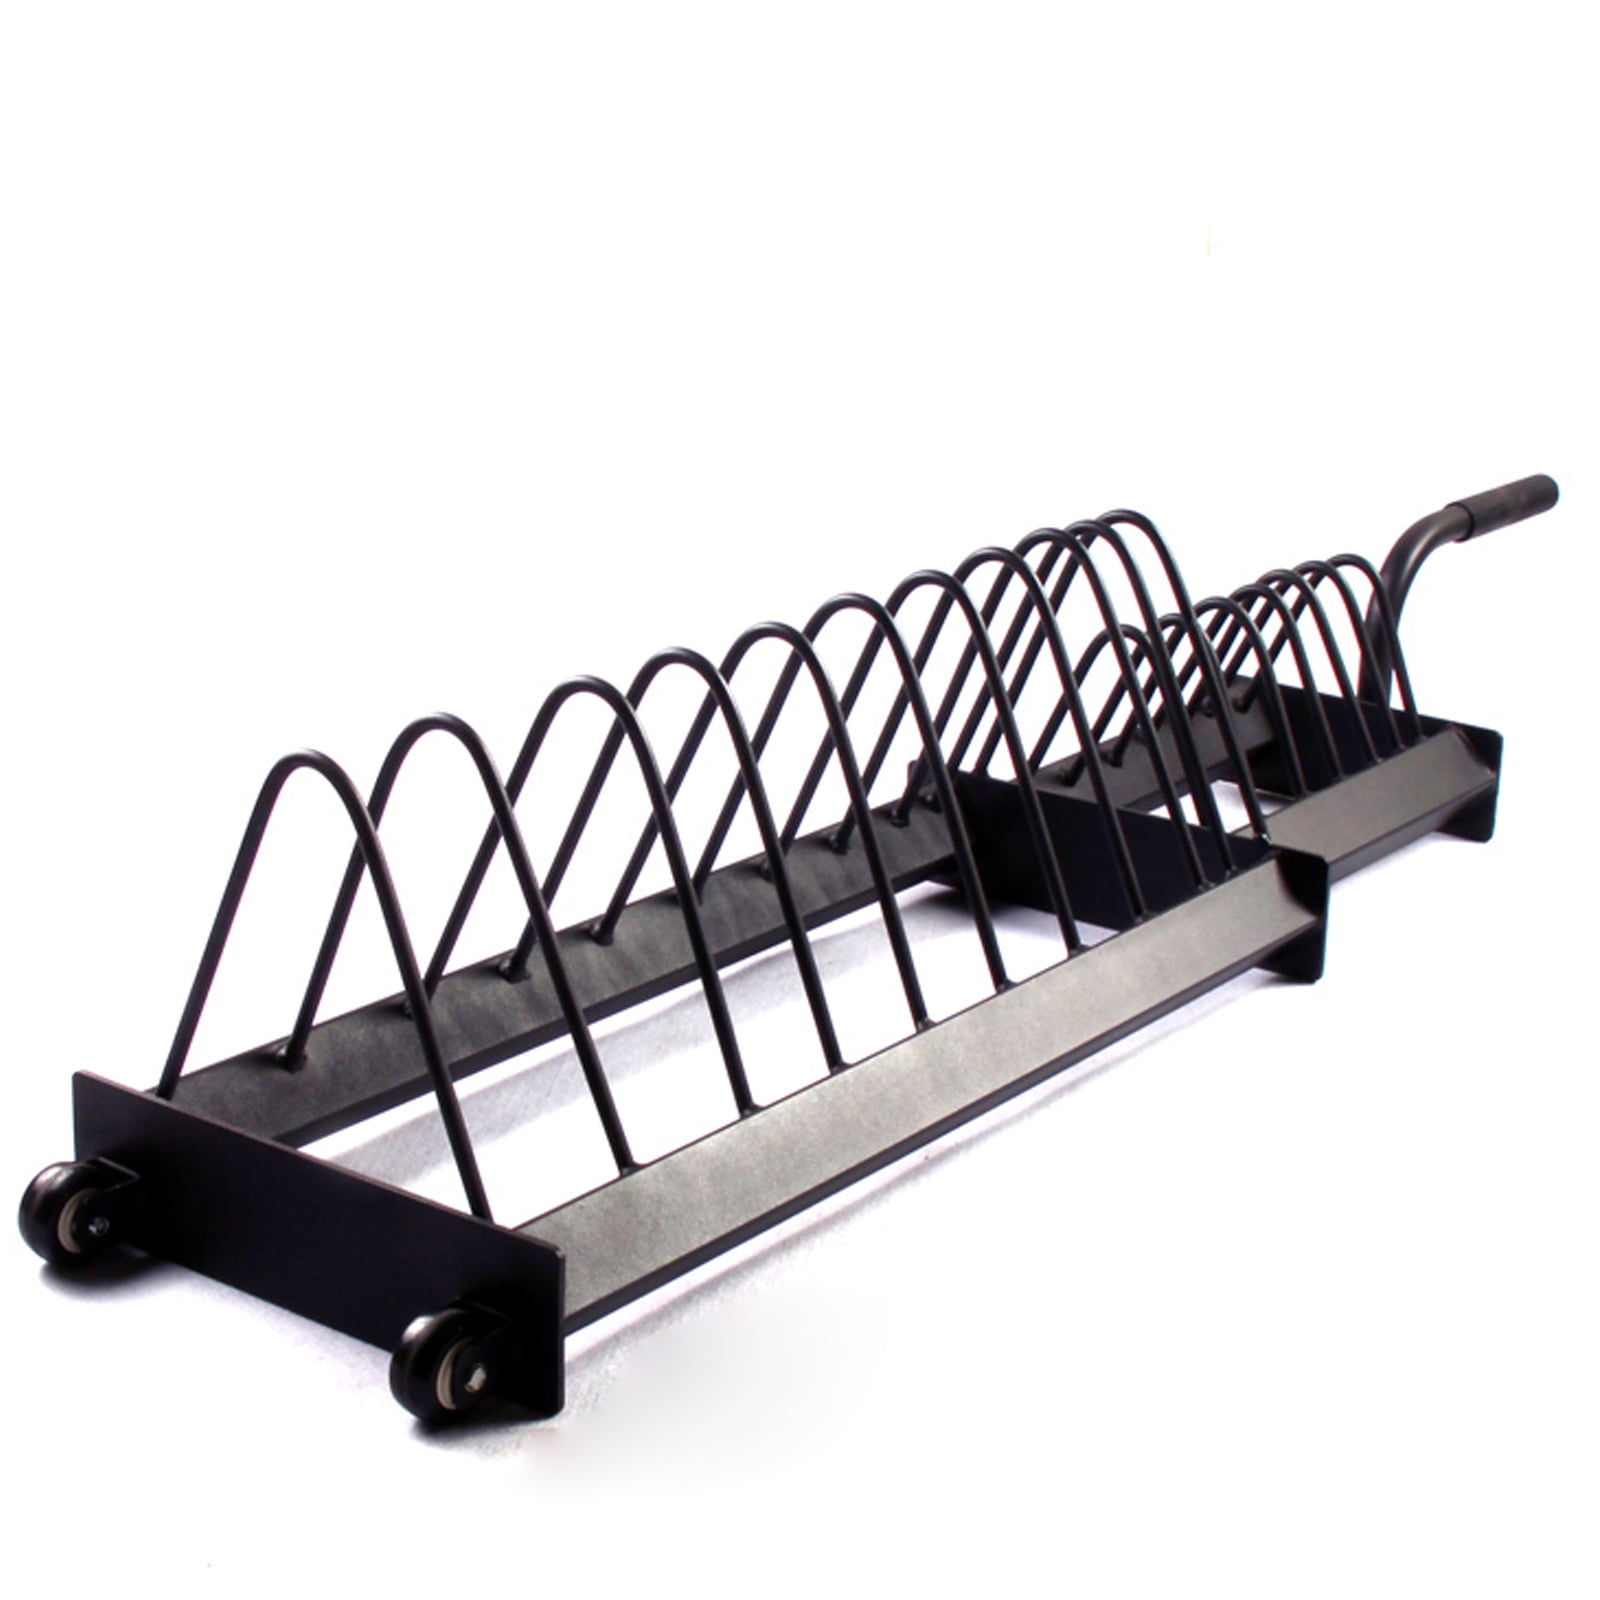 Details about    Horizontal Barbell Bumper Plate Rack Holder Olympic Bar Storage Plate Weight 